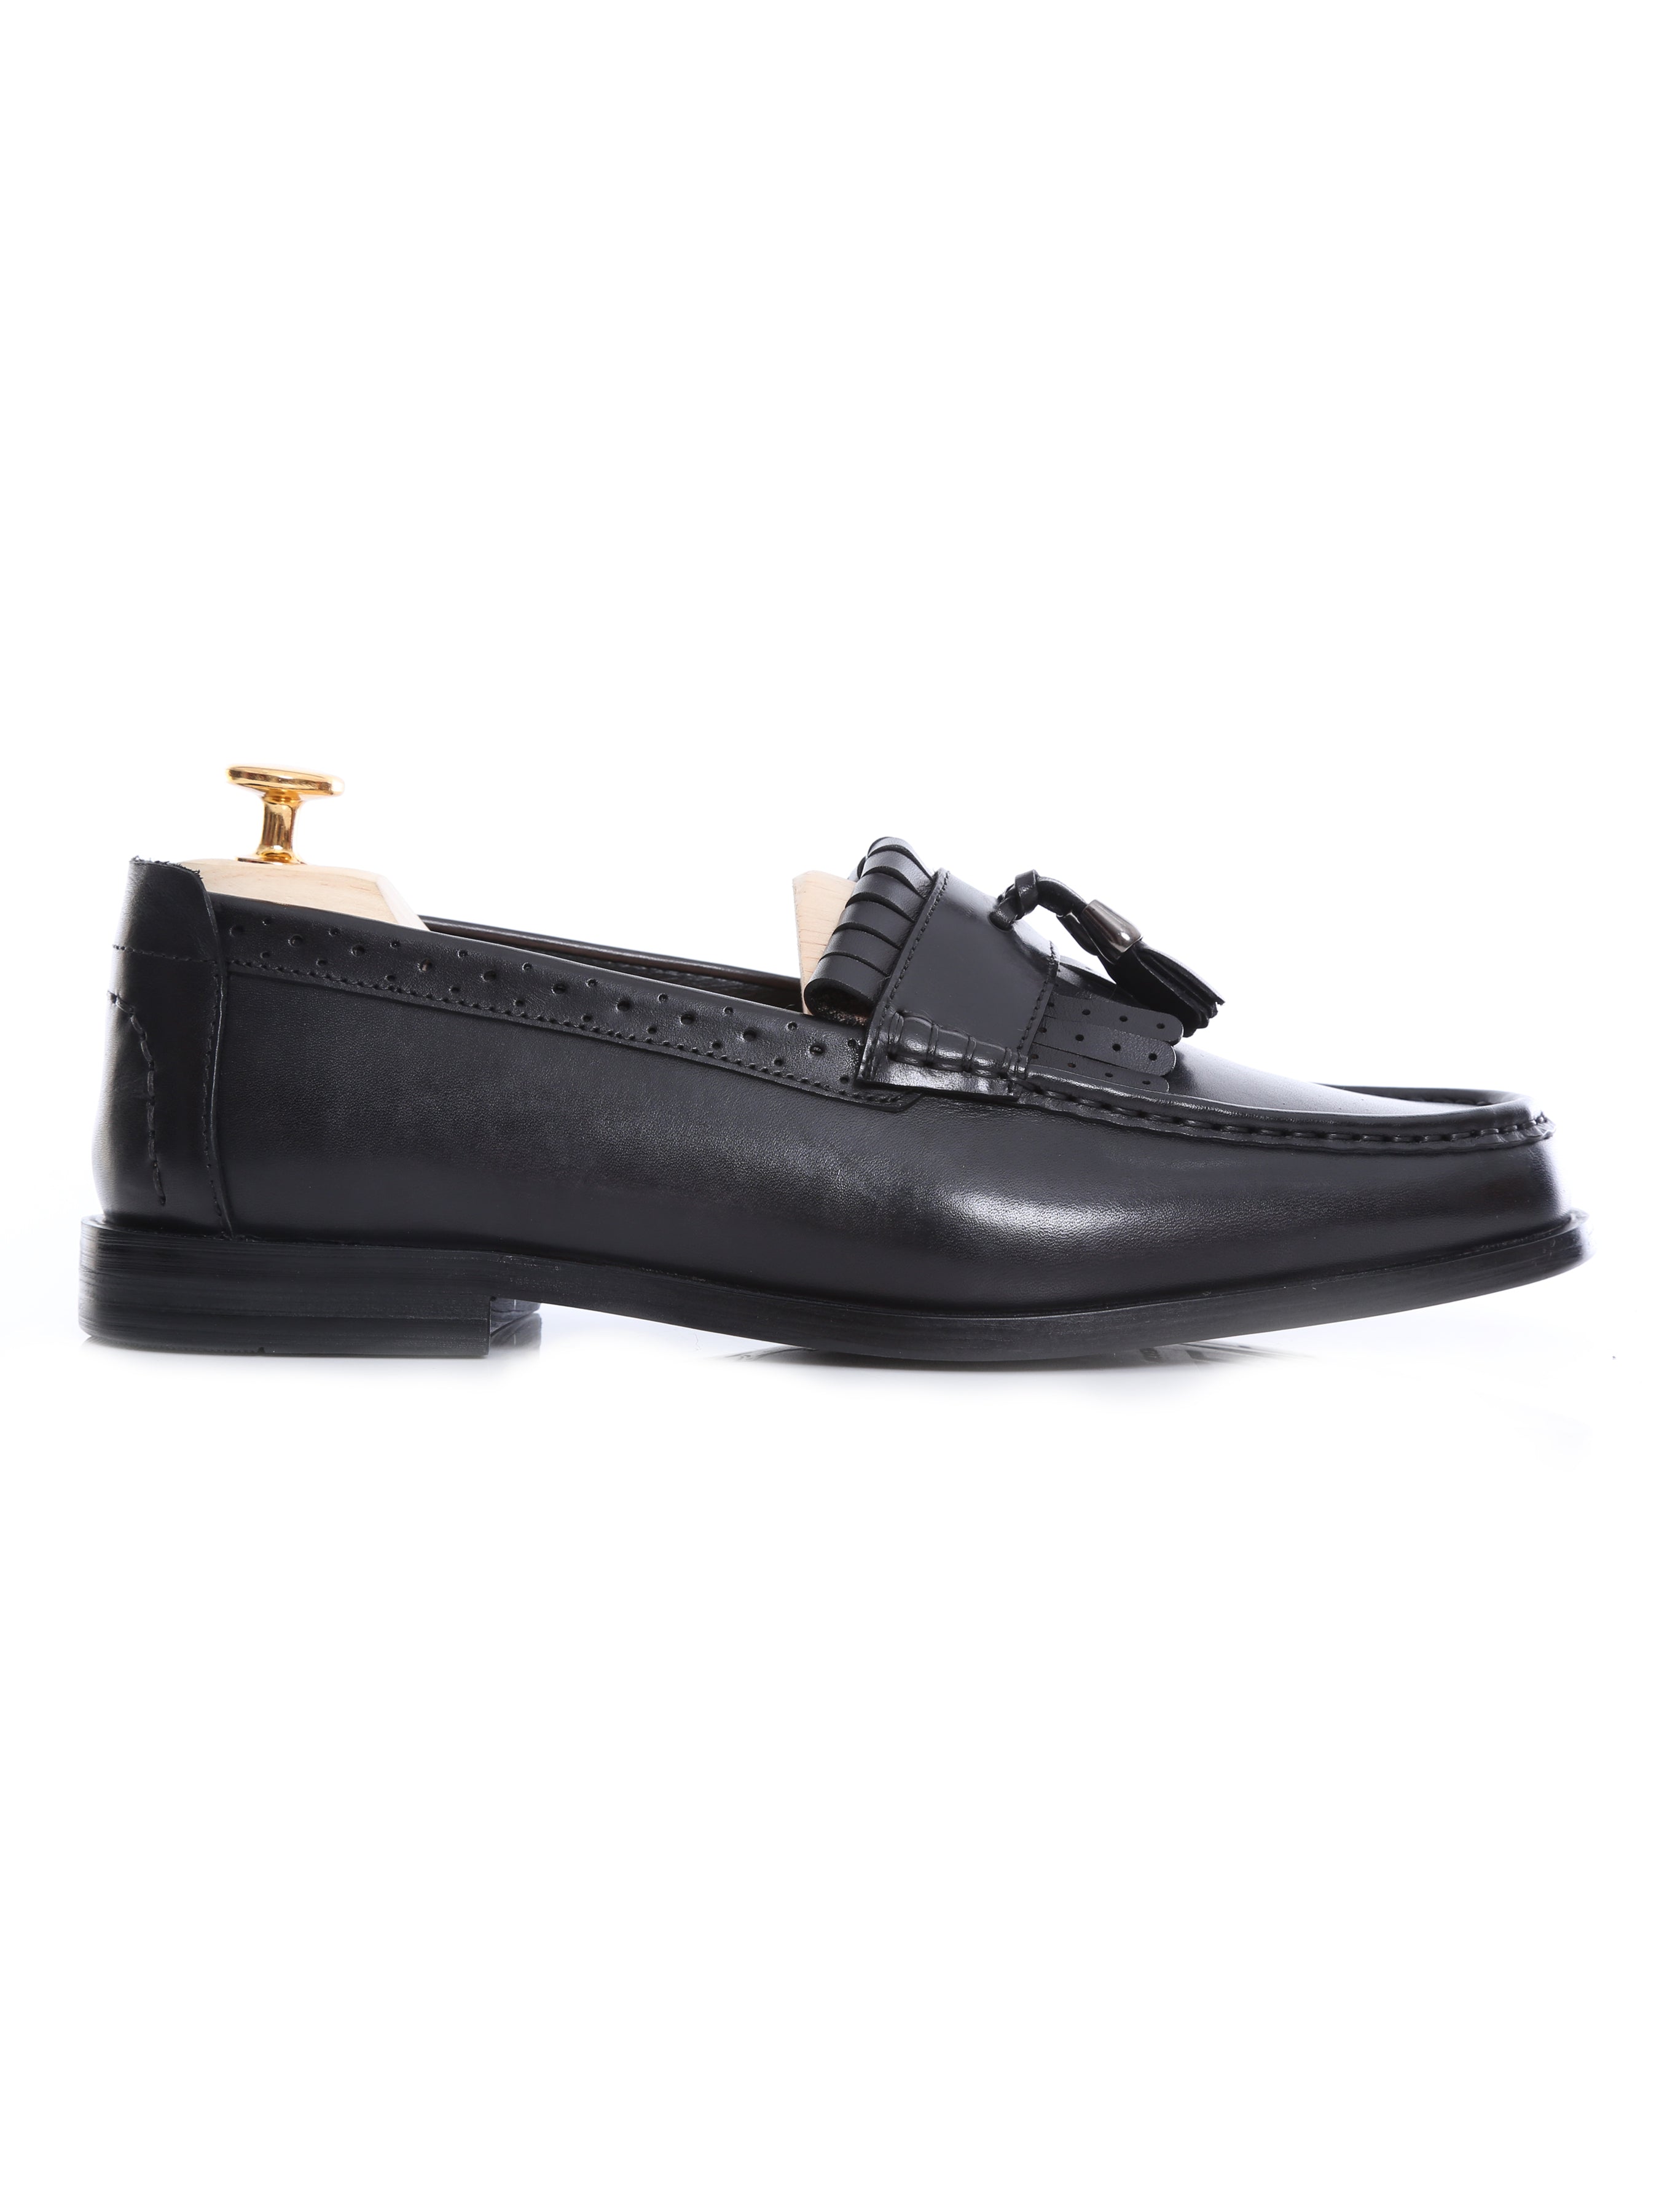 Fringe Classic Loafer - Black Grey with Tassel (Hand Painted Patina) - Zeve Shoes